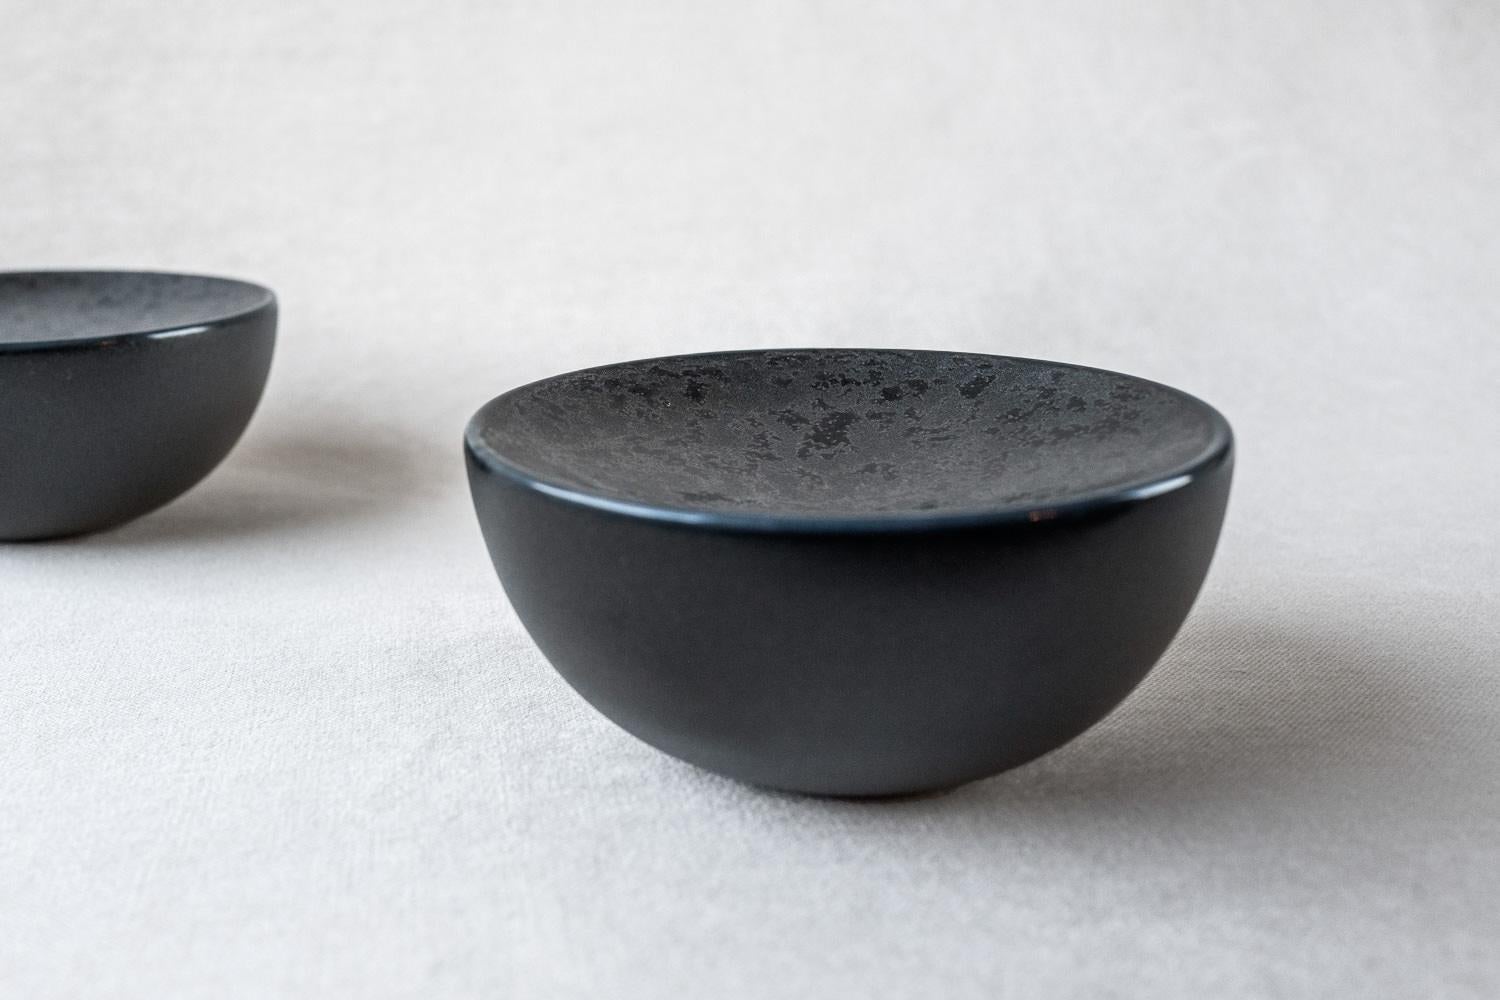 • Set of 2 x Medium porcelain side dishes
• 11,5 cm ø x 5,5 cm each
• Perfect for a sexy amuse-bouche, a pre-dessert or side dish
• Also works for the essential butter on the table
• Hand painted deep grey surface
• Designed in Amsterdam /